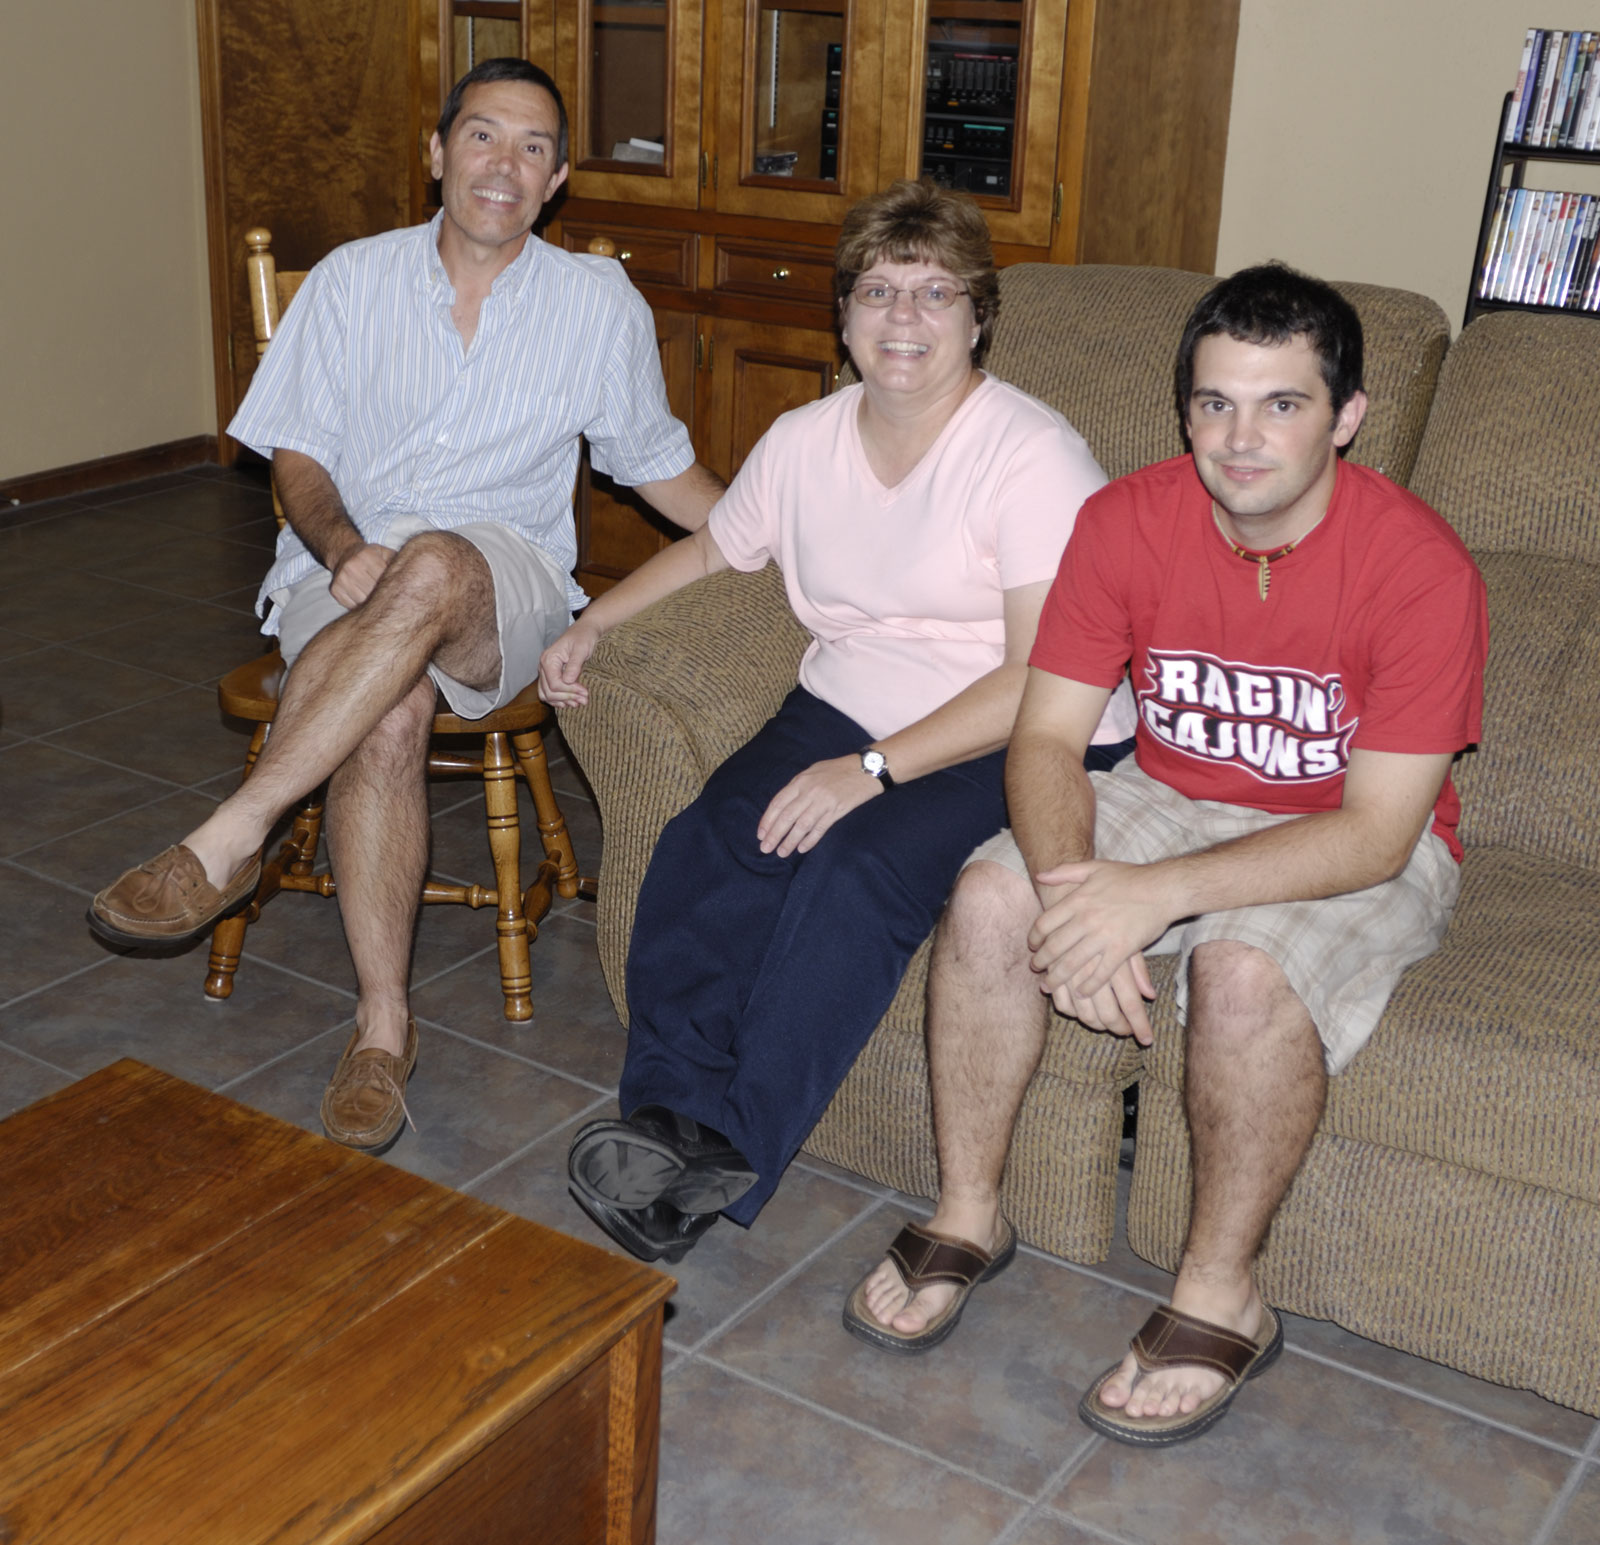 Rusty, Julie, and their son Eric in their home